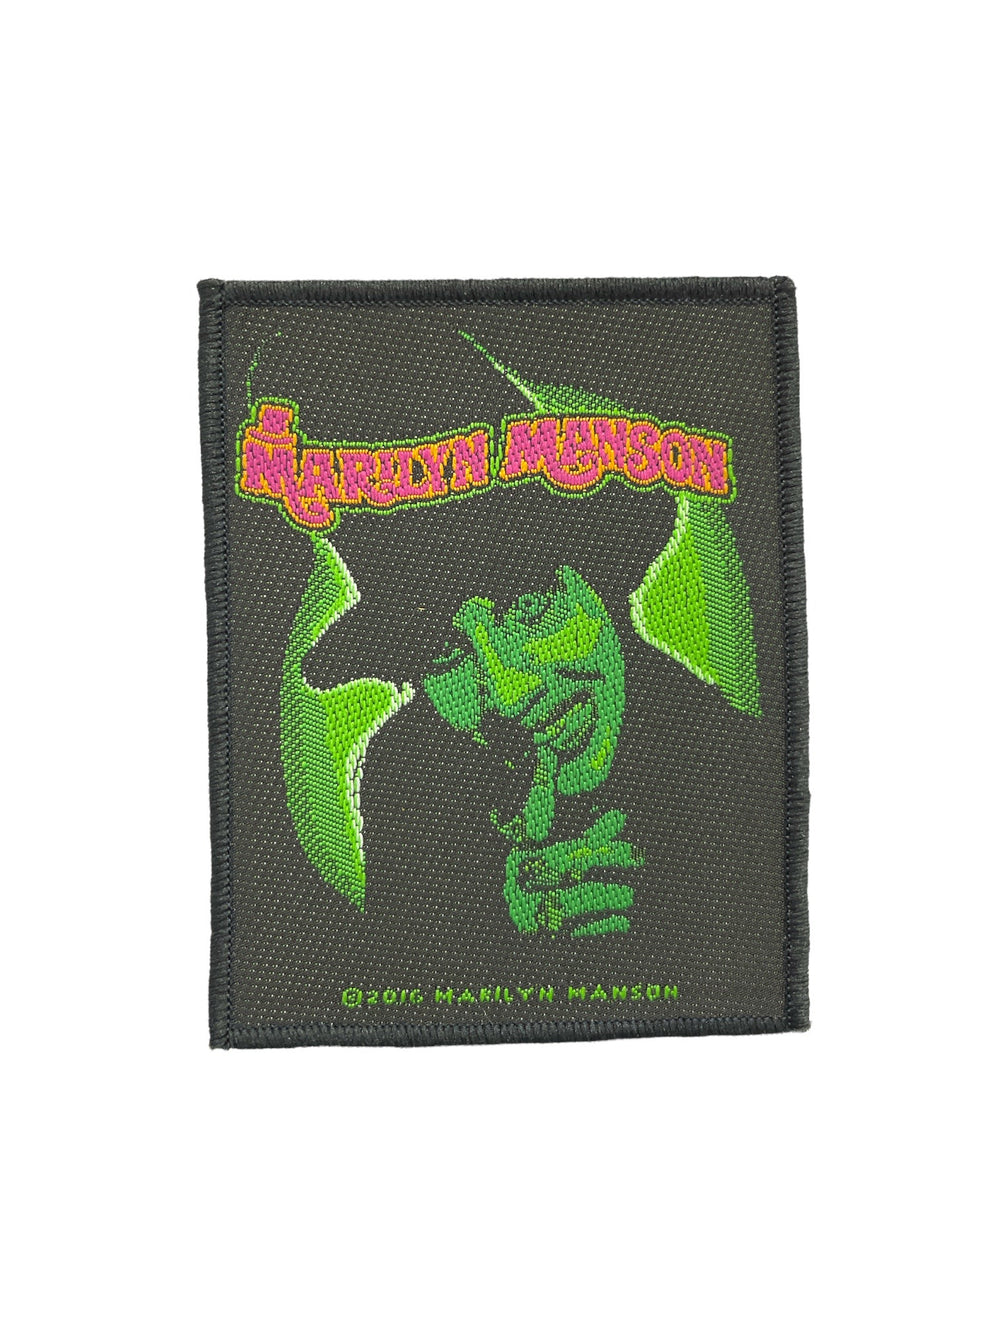 Marilyn Manson Smell Official Woven Patch Brand New